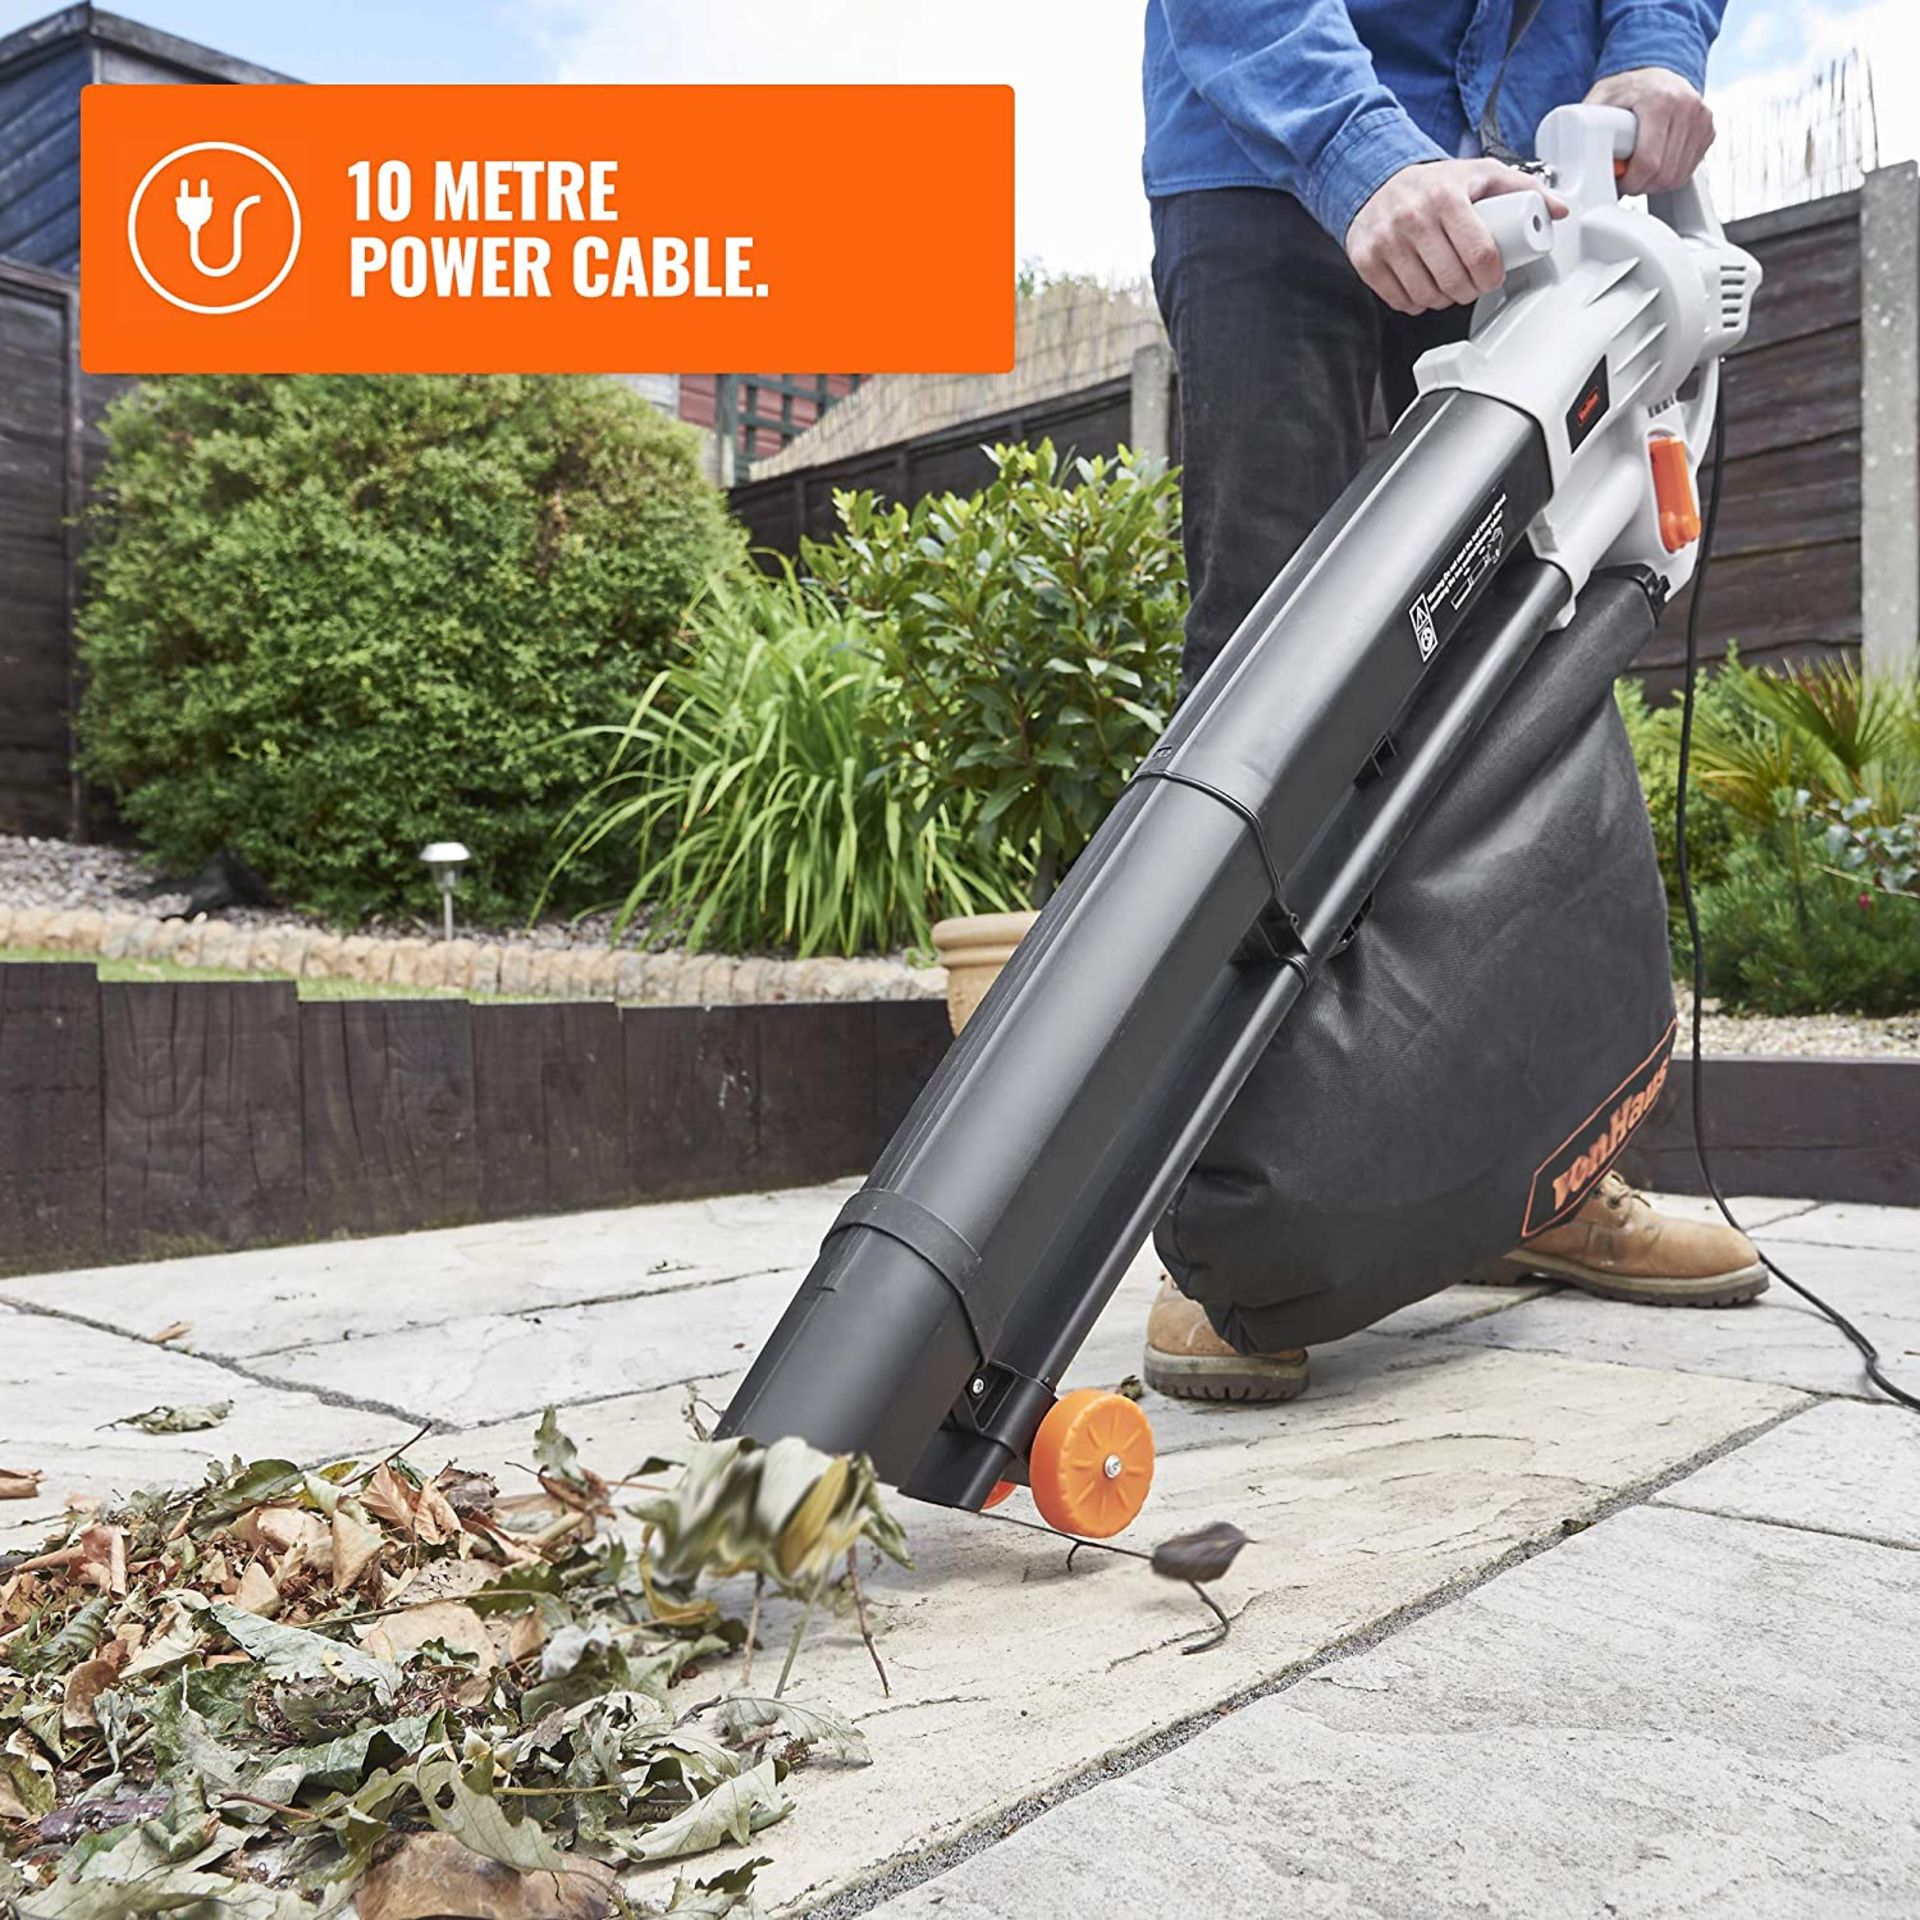 (GE87) 3 in 1 Leaf Blower - 3000W Garden Vacuum & Mulcher - 35 Litre Collection Bag, 10:1 Shred... - Image 2 of 3